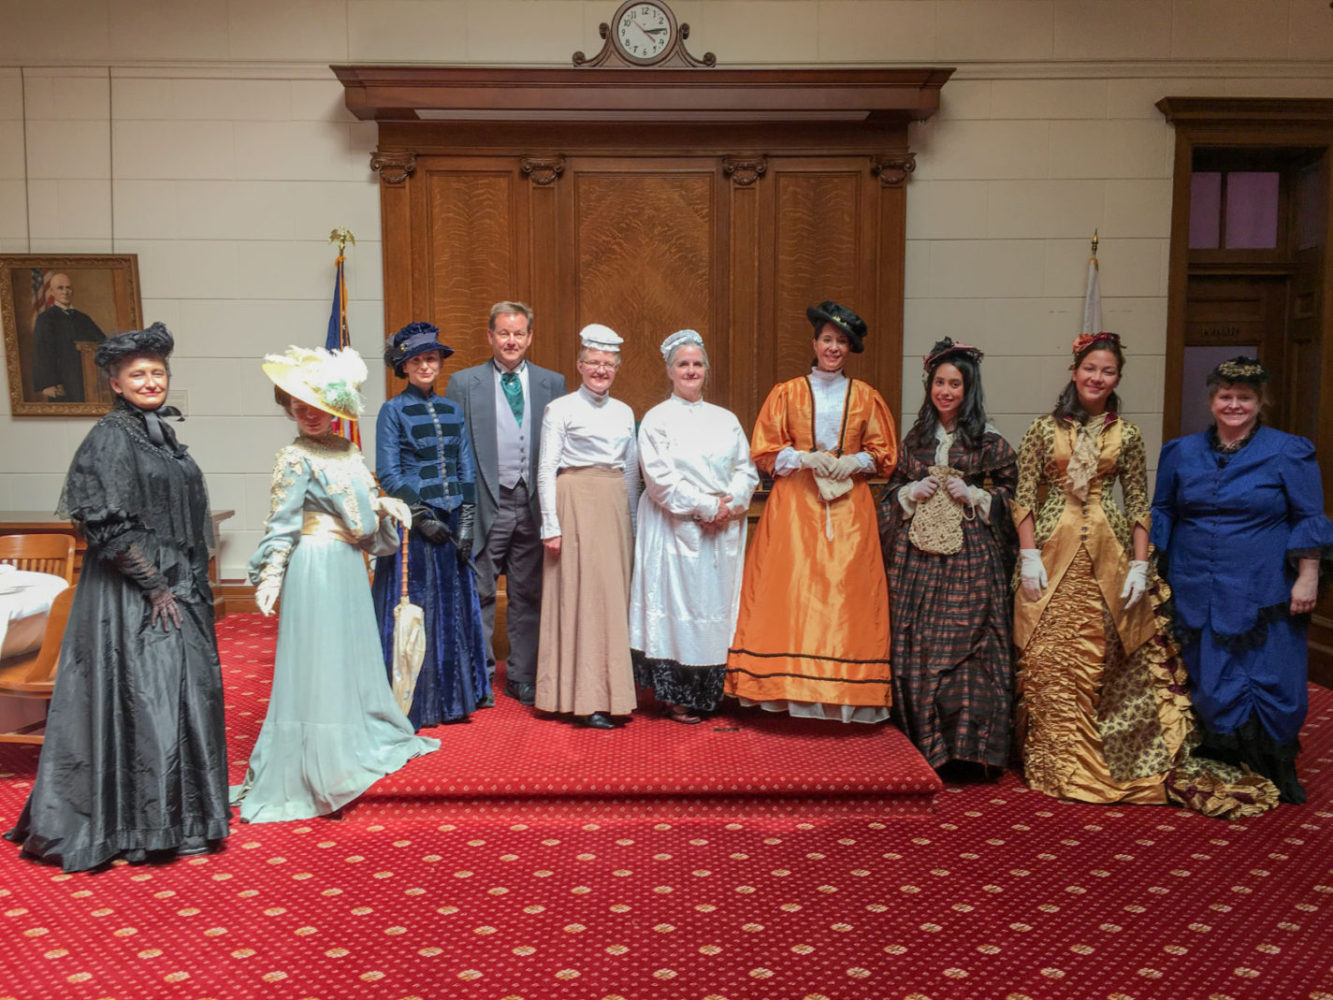 A group of people dressed in Victorian dress at San Mateo County History Museum